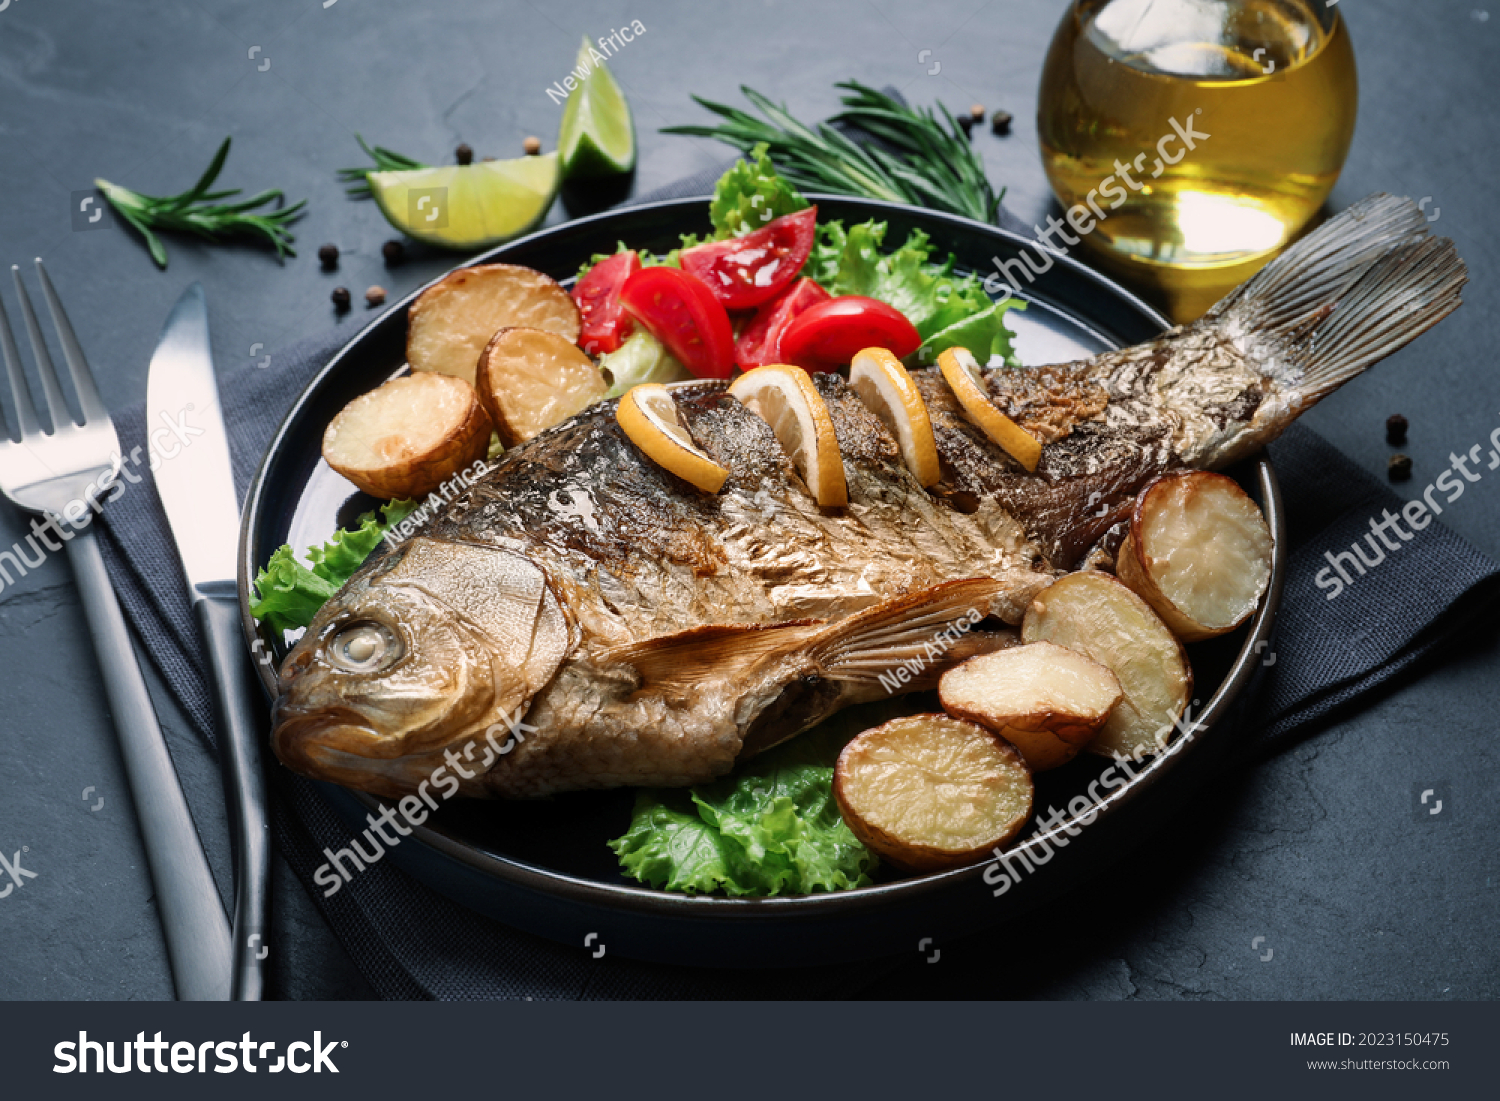 Tasty homemade roasted crucian carp served on black table. River fish #2023150475